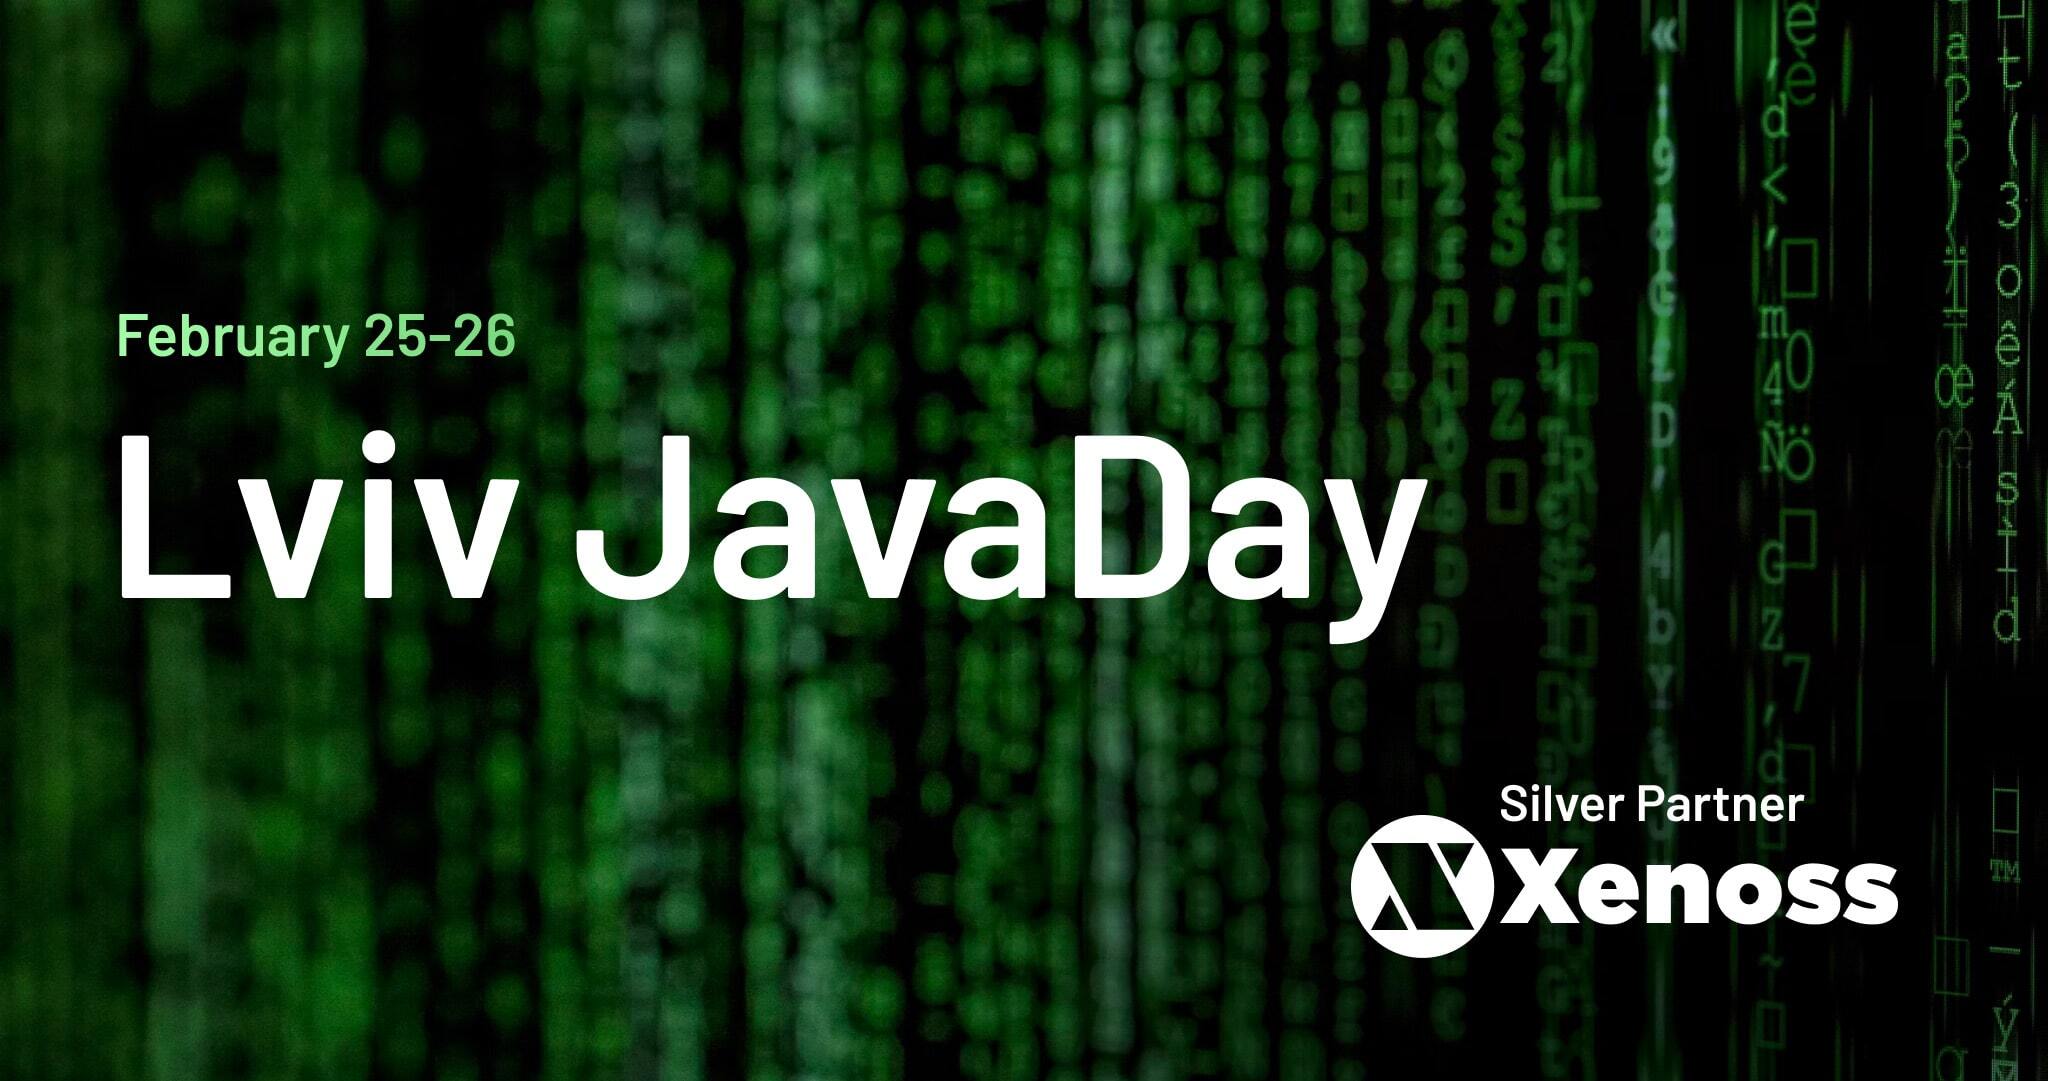 Xenoss Is a Silver Sponsor of JavaDay Lviv